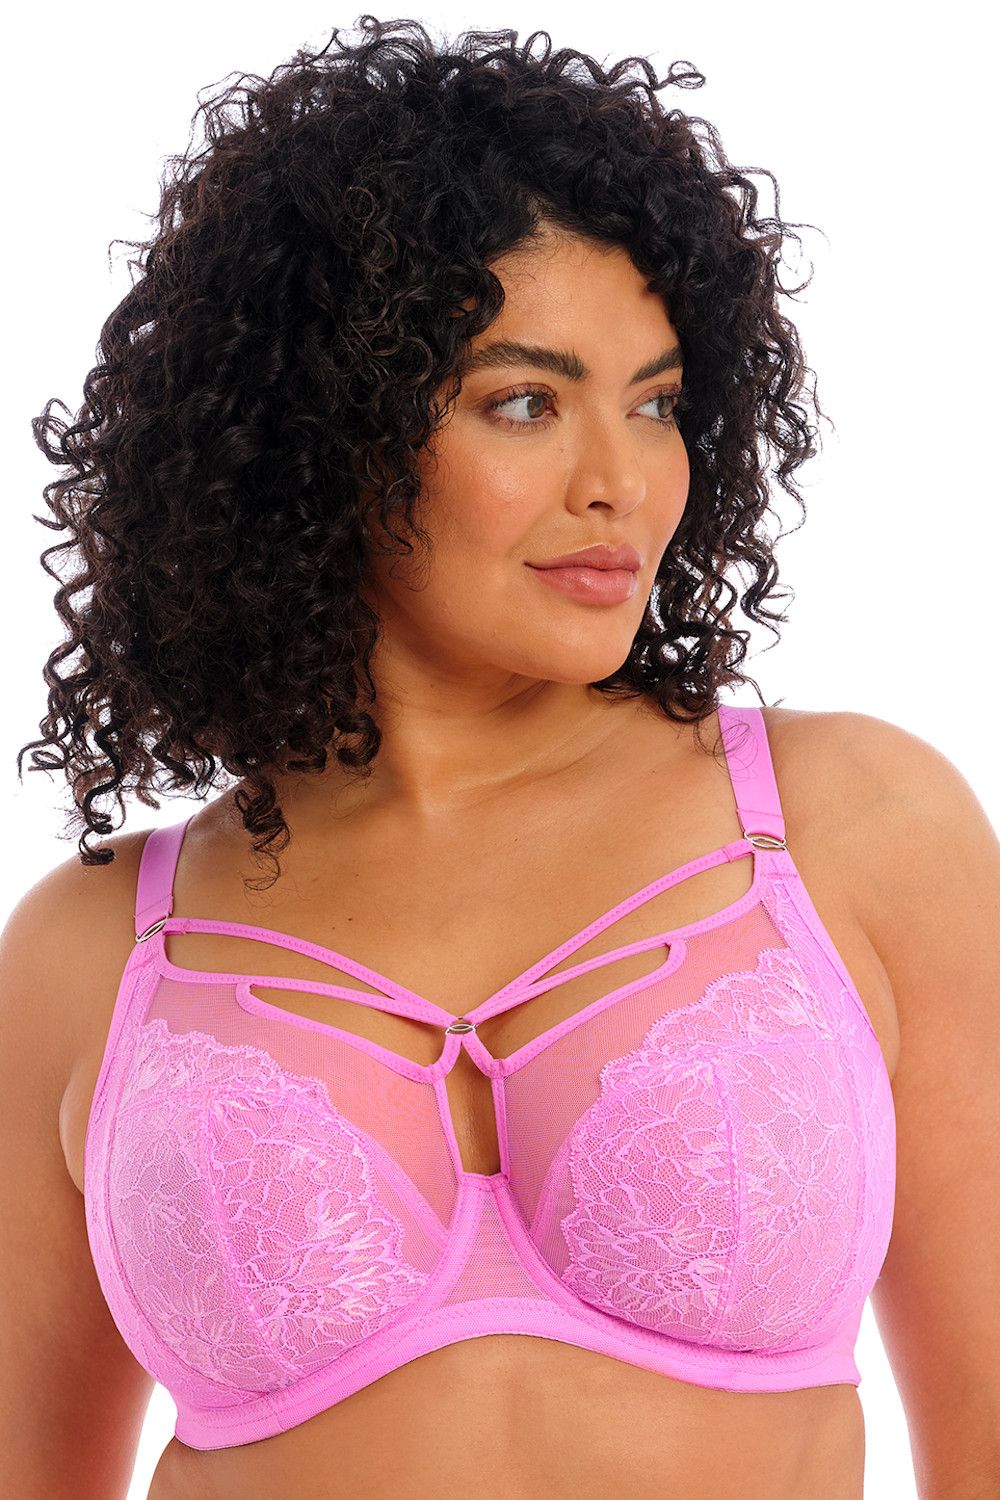 LINGERIE BRA TRY ON HAUL FOR BIG BUSTED CURVY/ PLUS SIZE WOMEN, ELOMI, FANTASIE